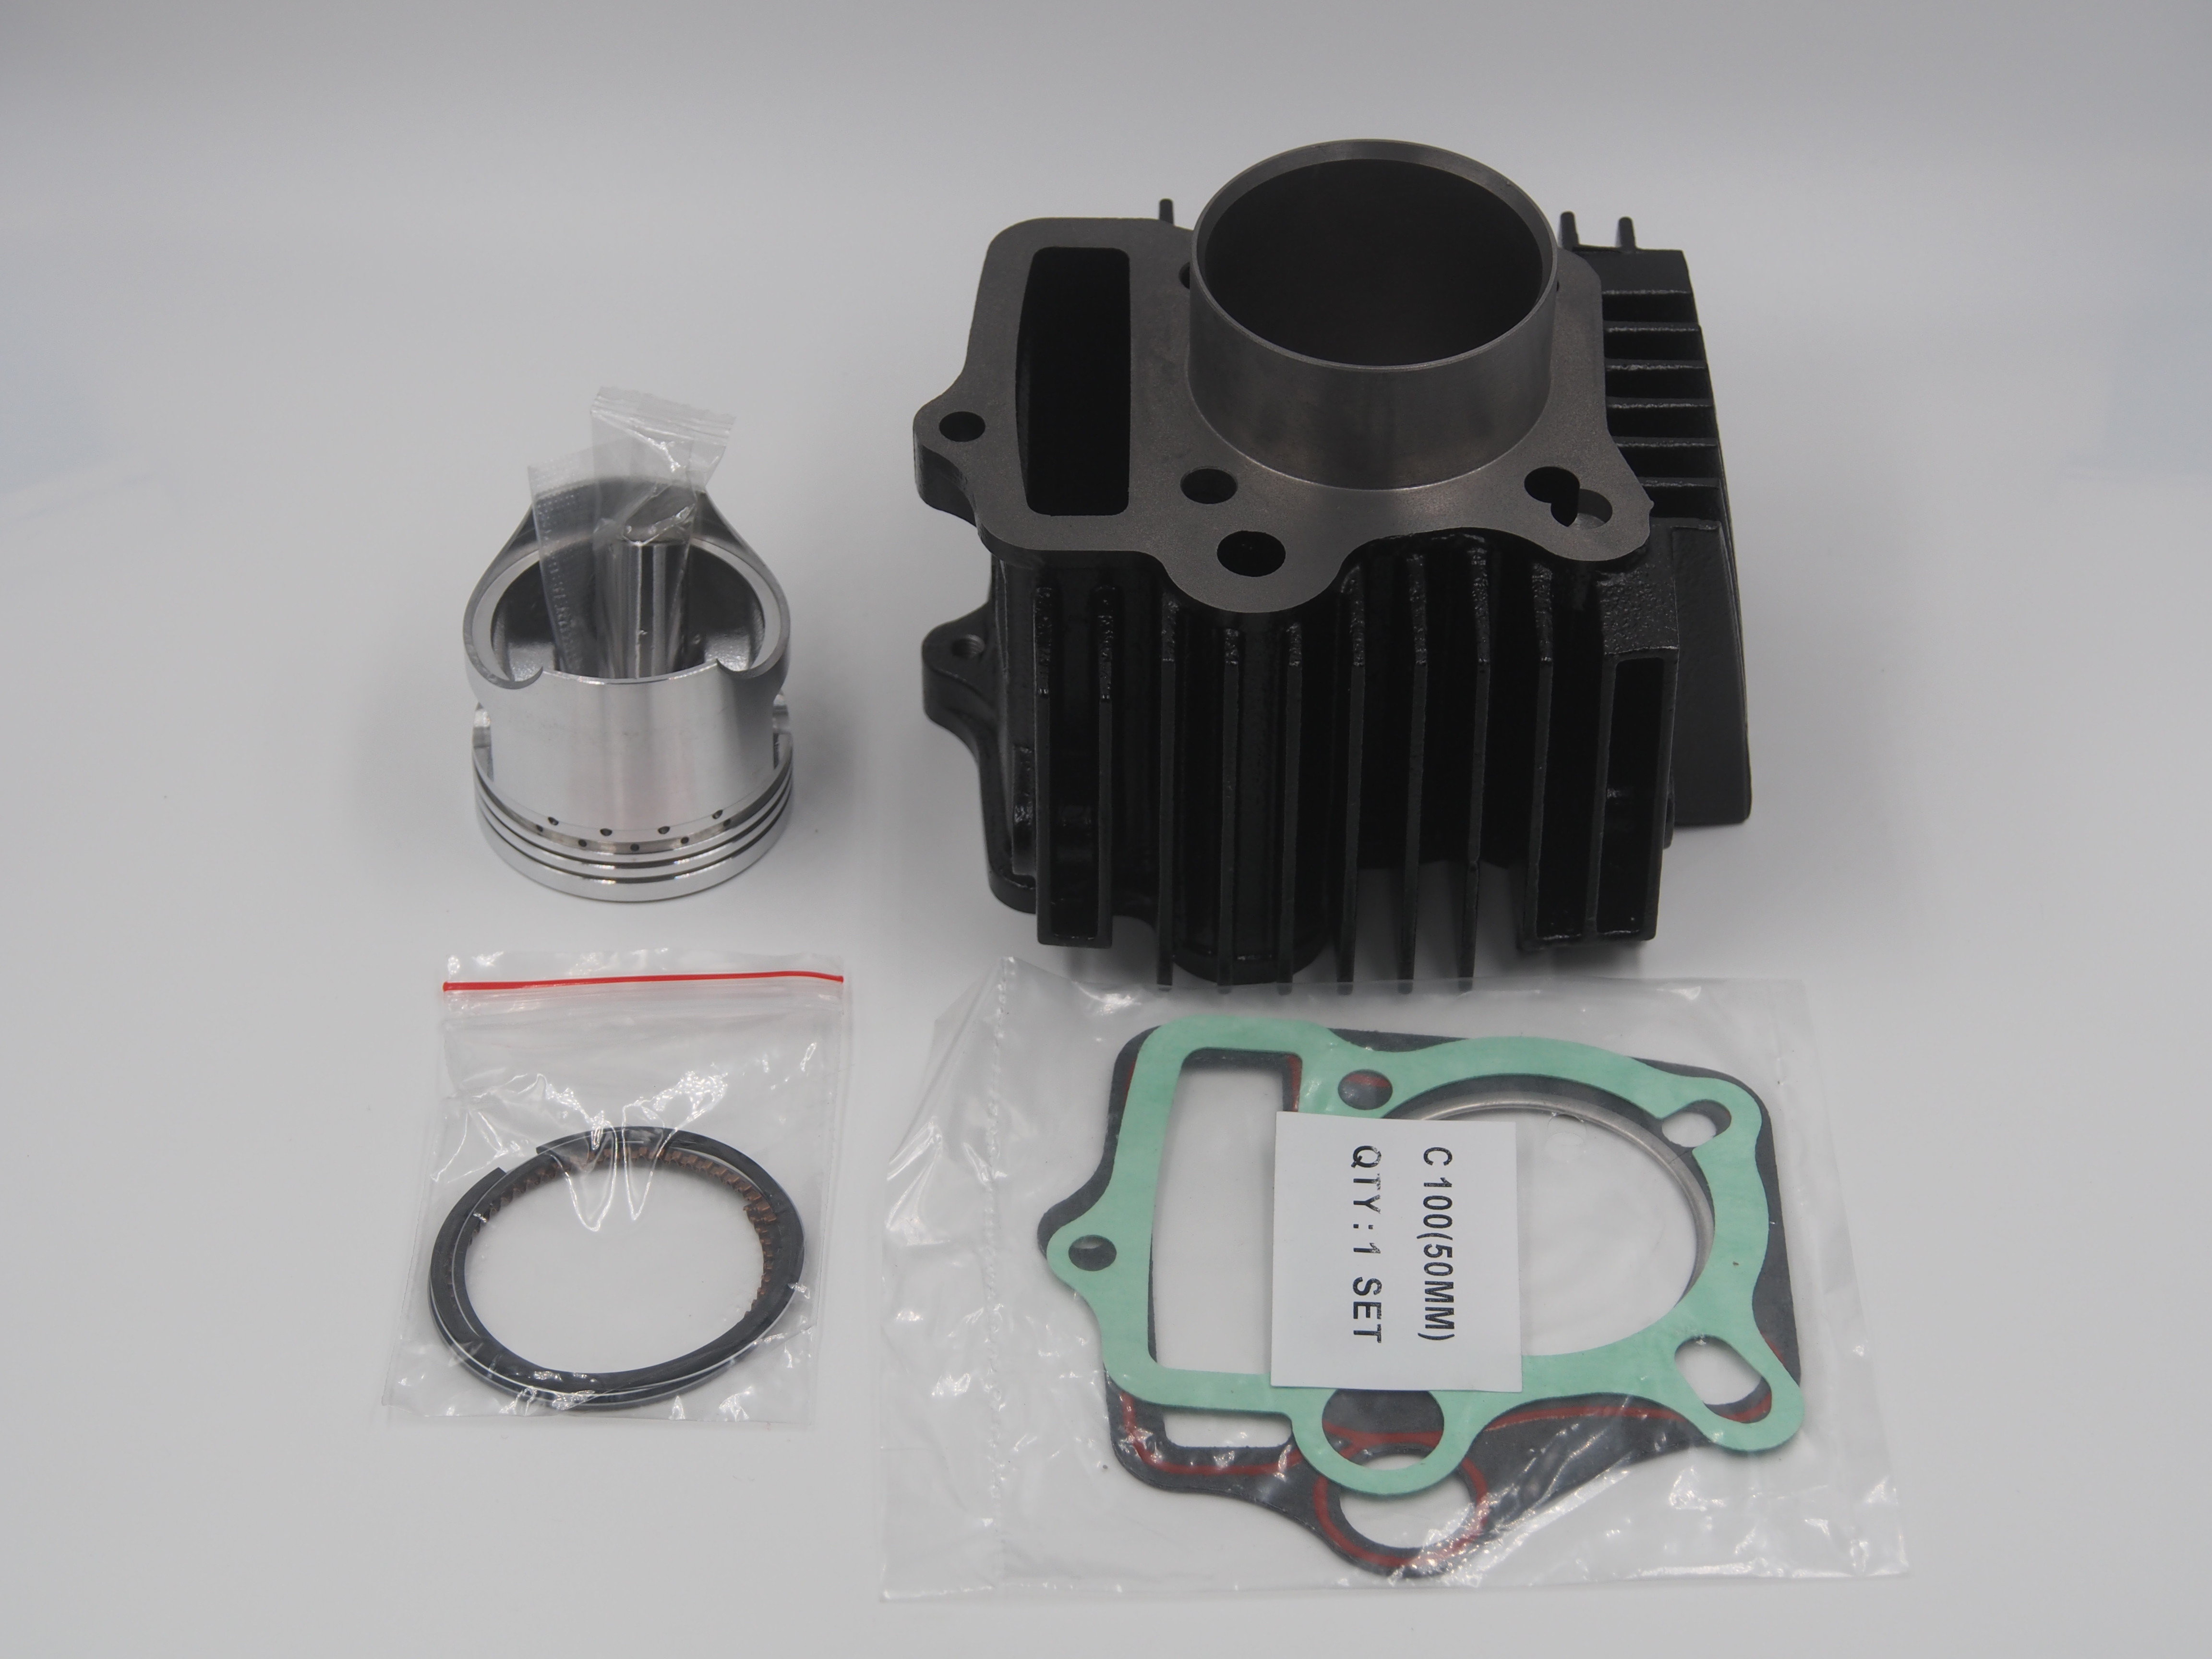 50mm Bore Diameter Motorcycle Cylinder Kit High Temperature Resistance